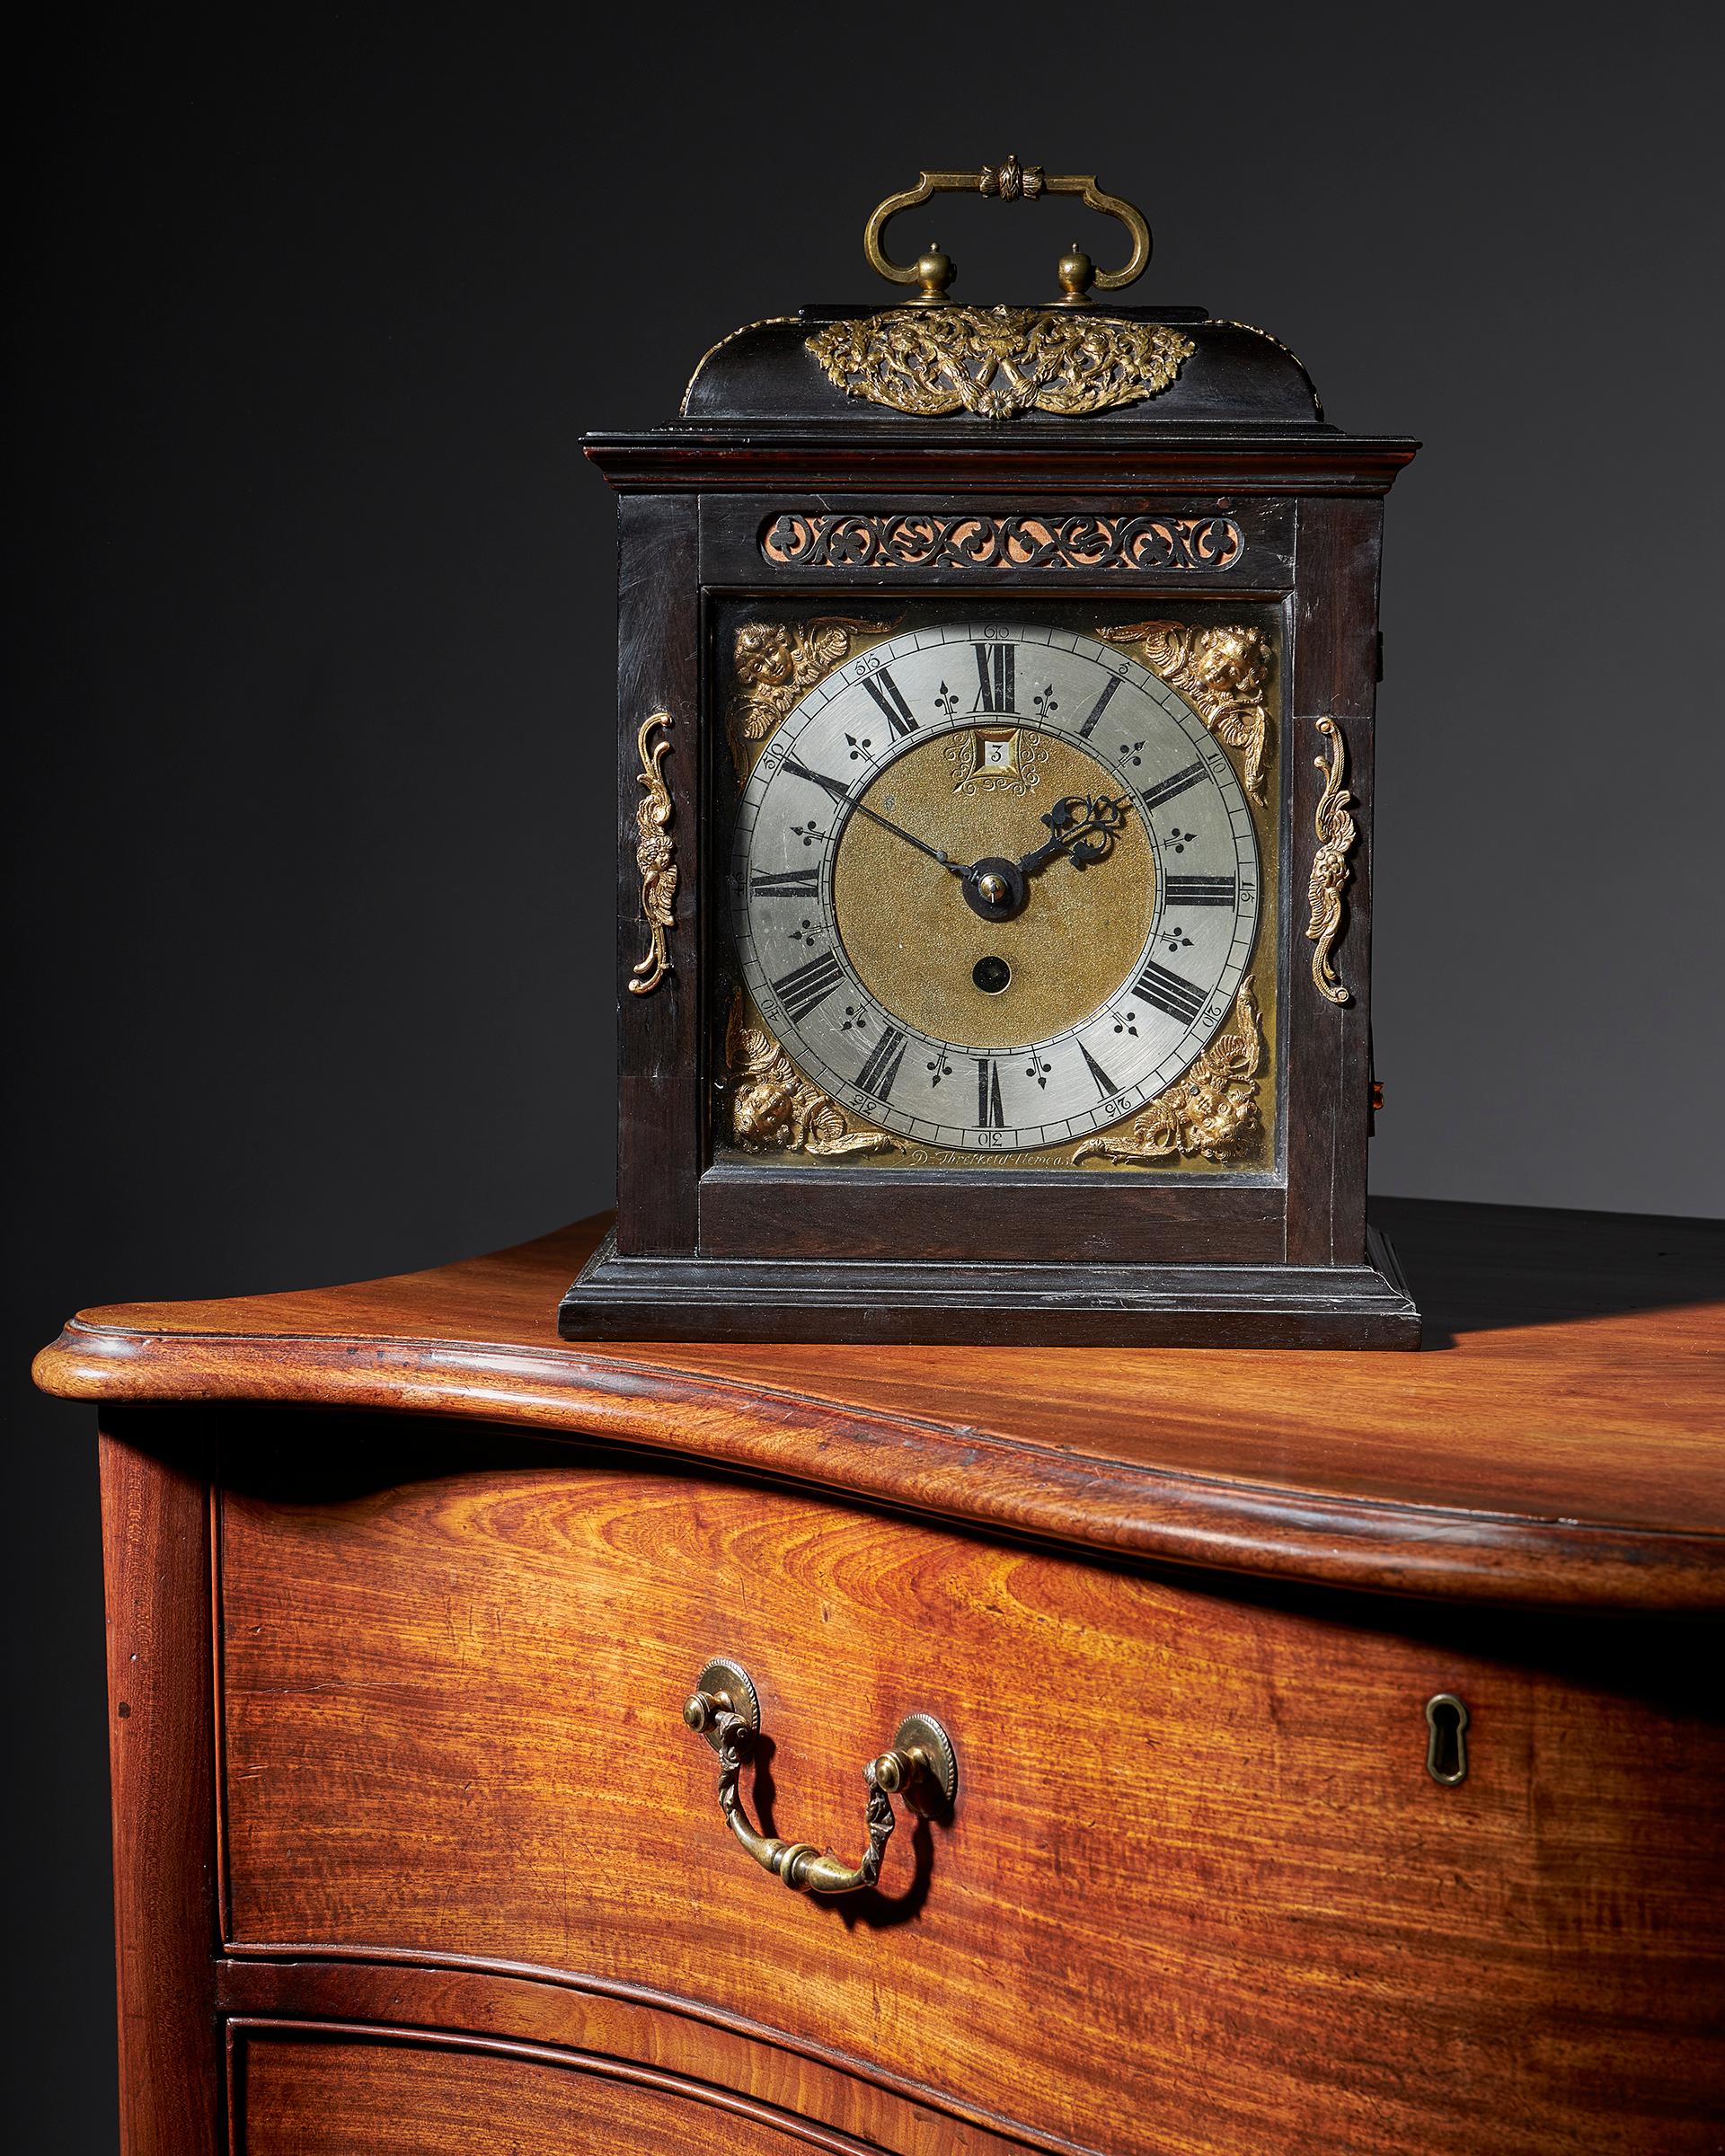 The eminent maker Deodatus Threlkeld (1658-1732) was an apprentice of Abraham Fromanteel, one of Ahasuerus Fromanteel’s sons. The latter can be regarded as the father of English clockmaking as he introduced the pendulum clock in England. 

Several